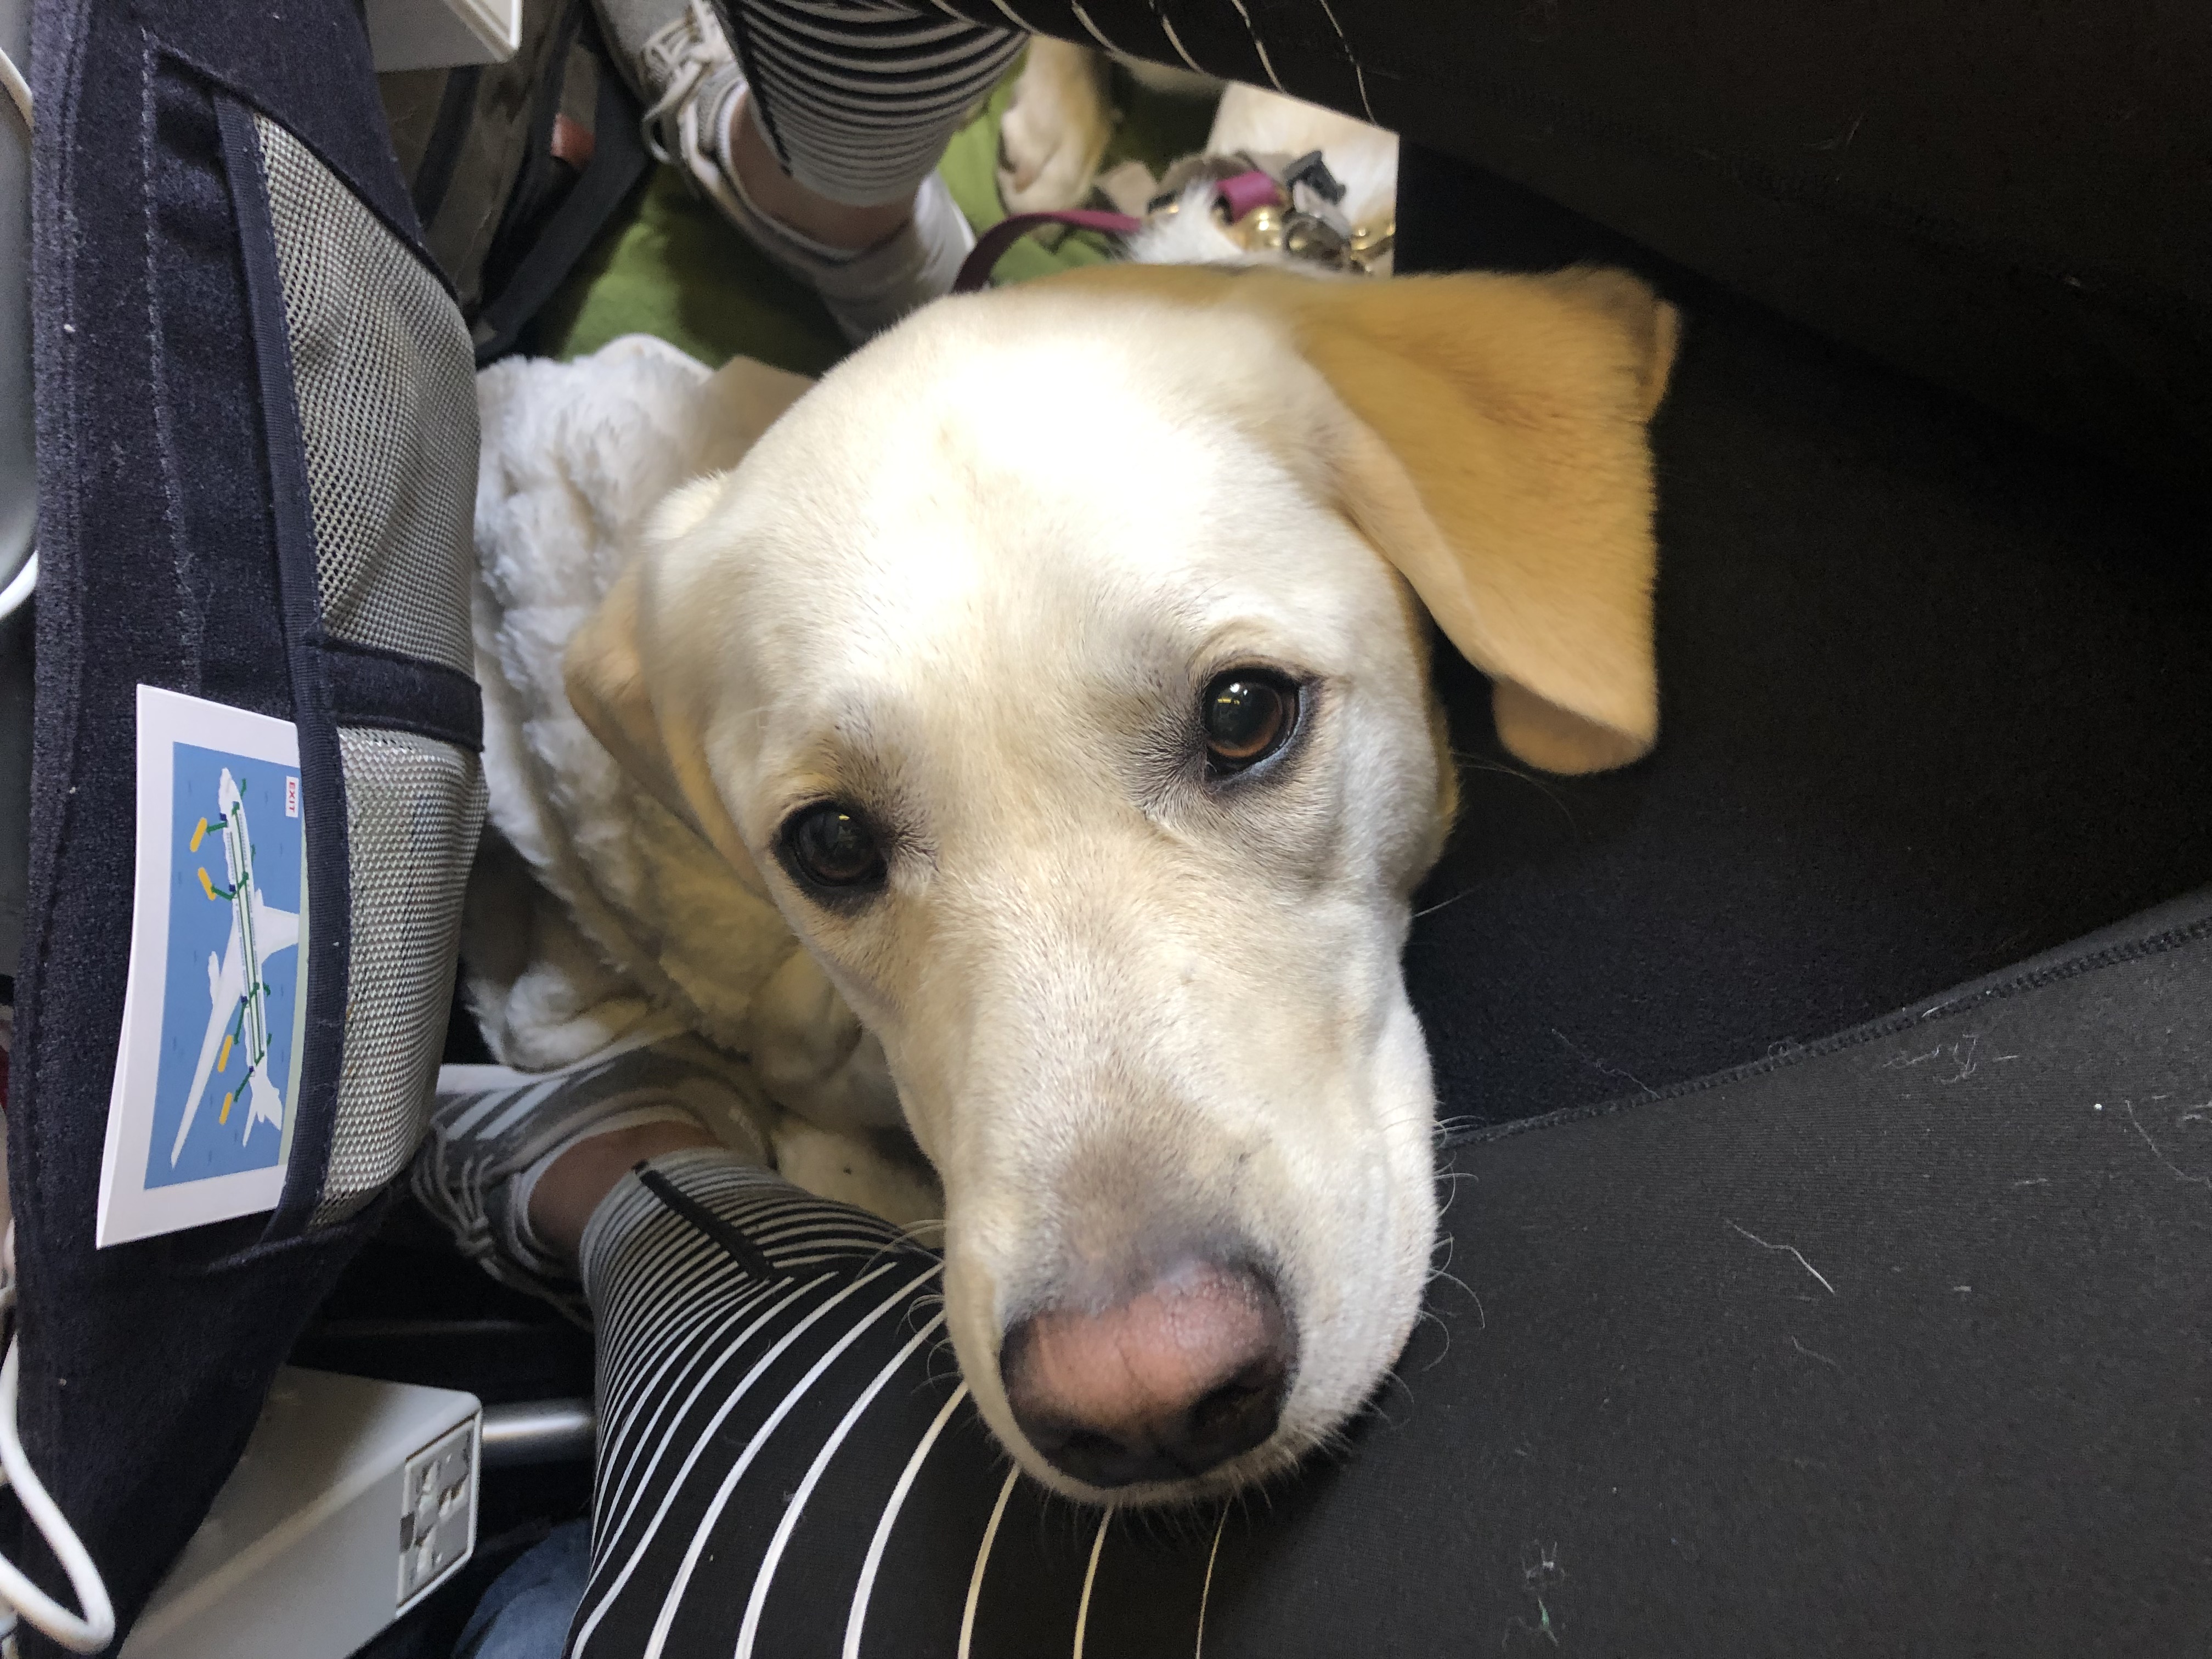 Dot Is Cracking Down On Emotional Support Animals On Airplanes